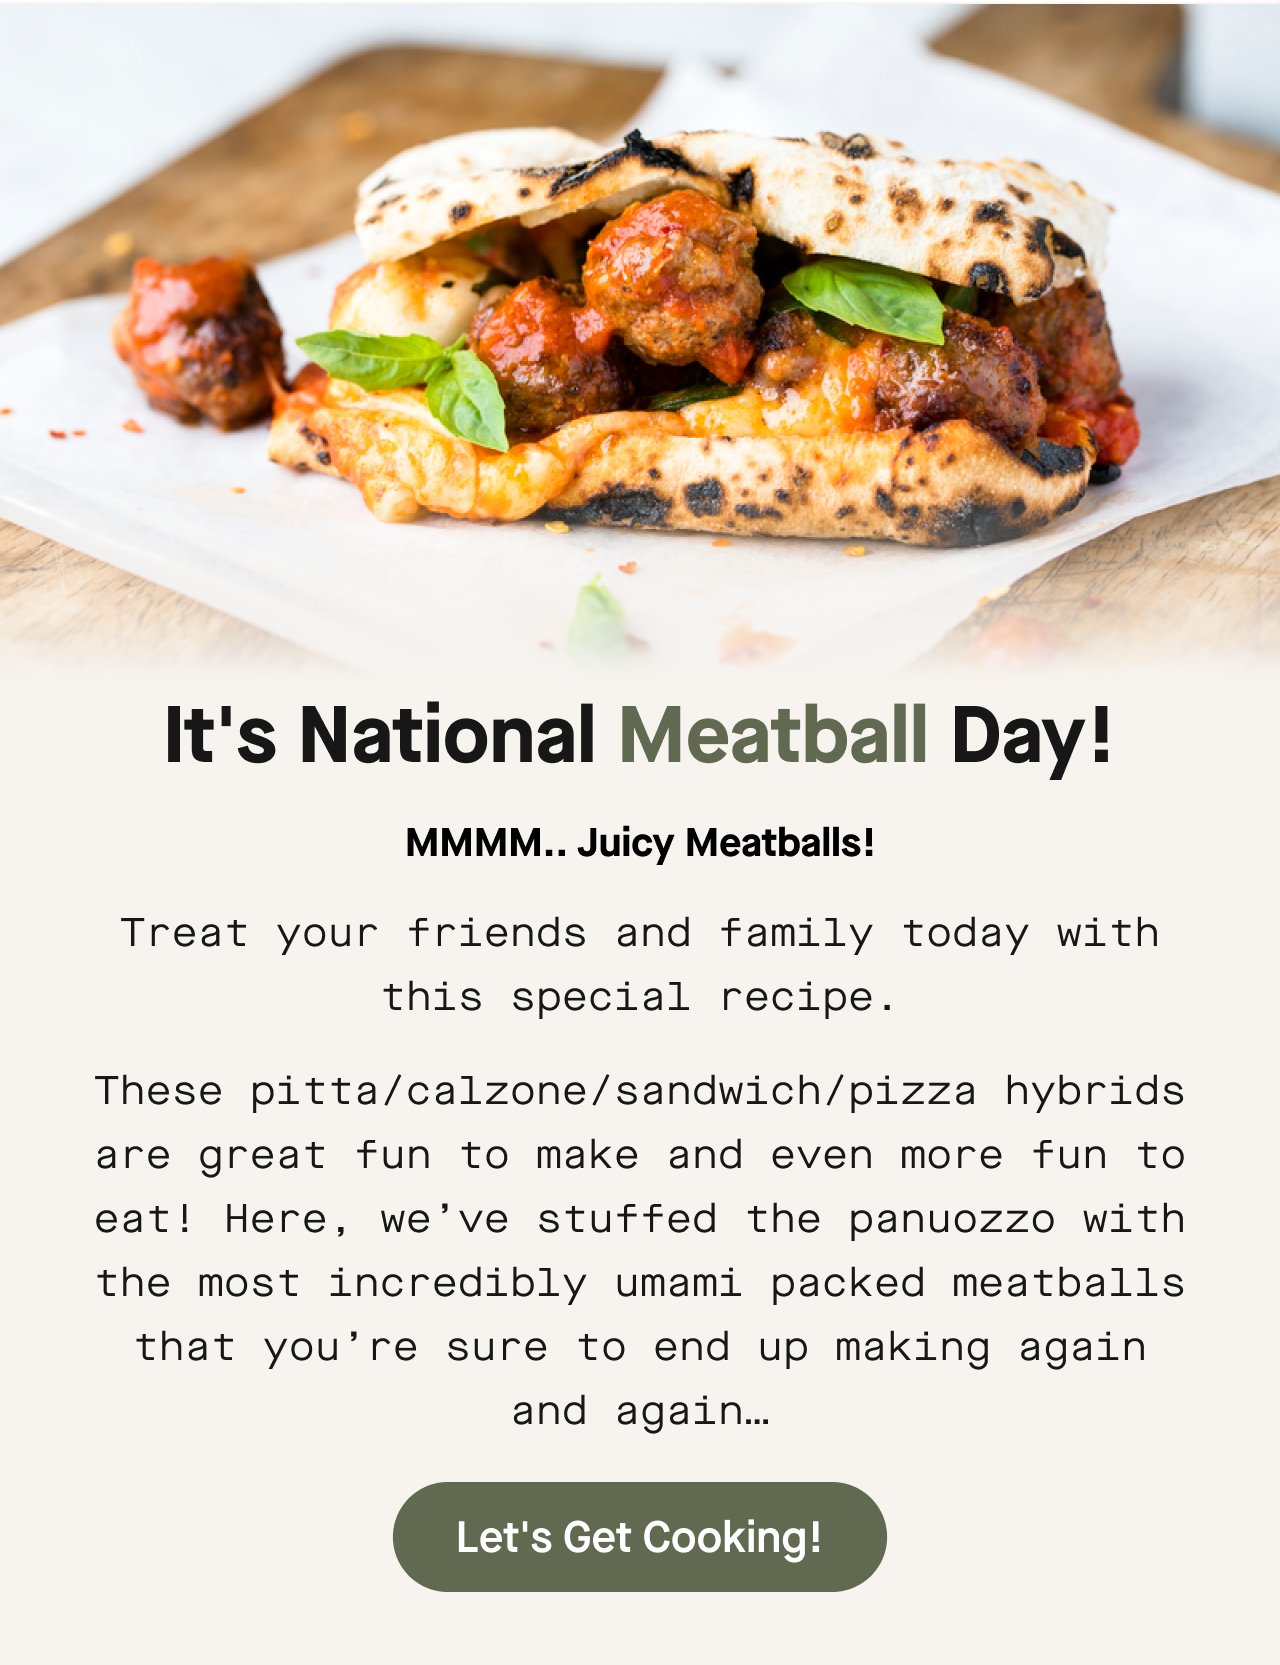 It's National Meatball Day